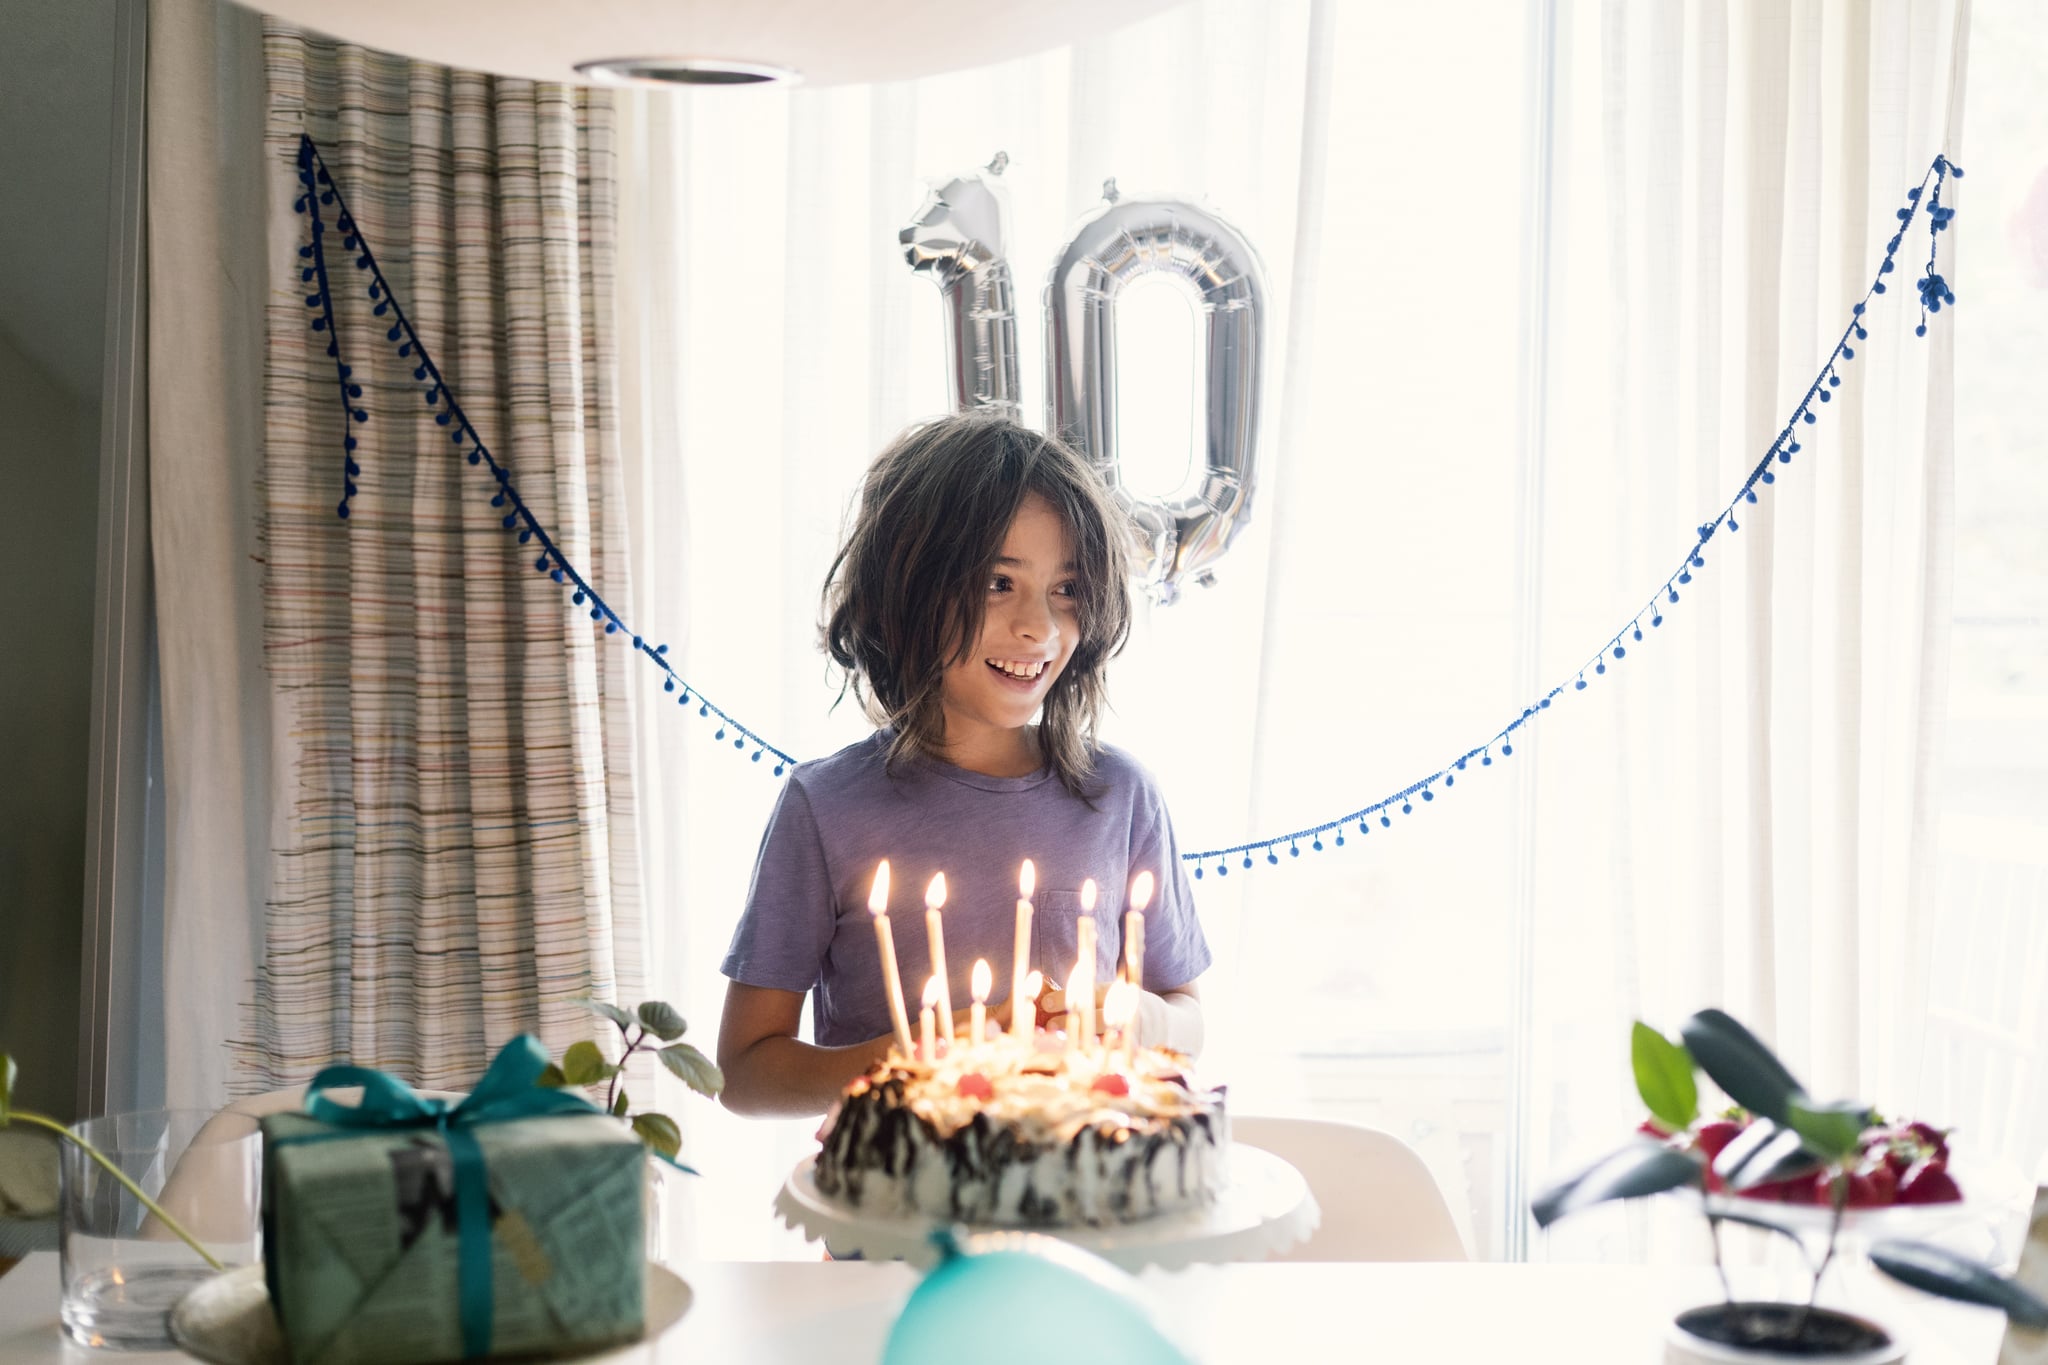 Birthday Party Ideas For Teens and Tweens   POPSUGAR Family